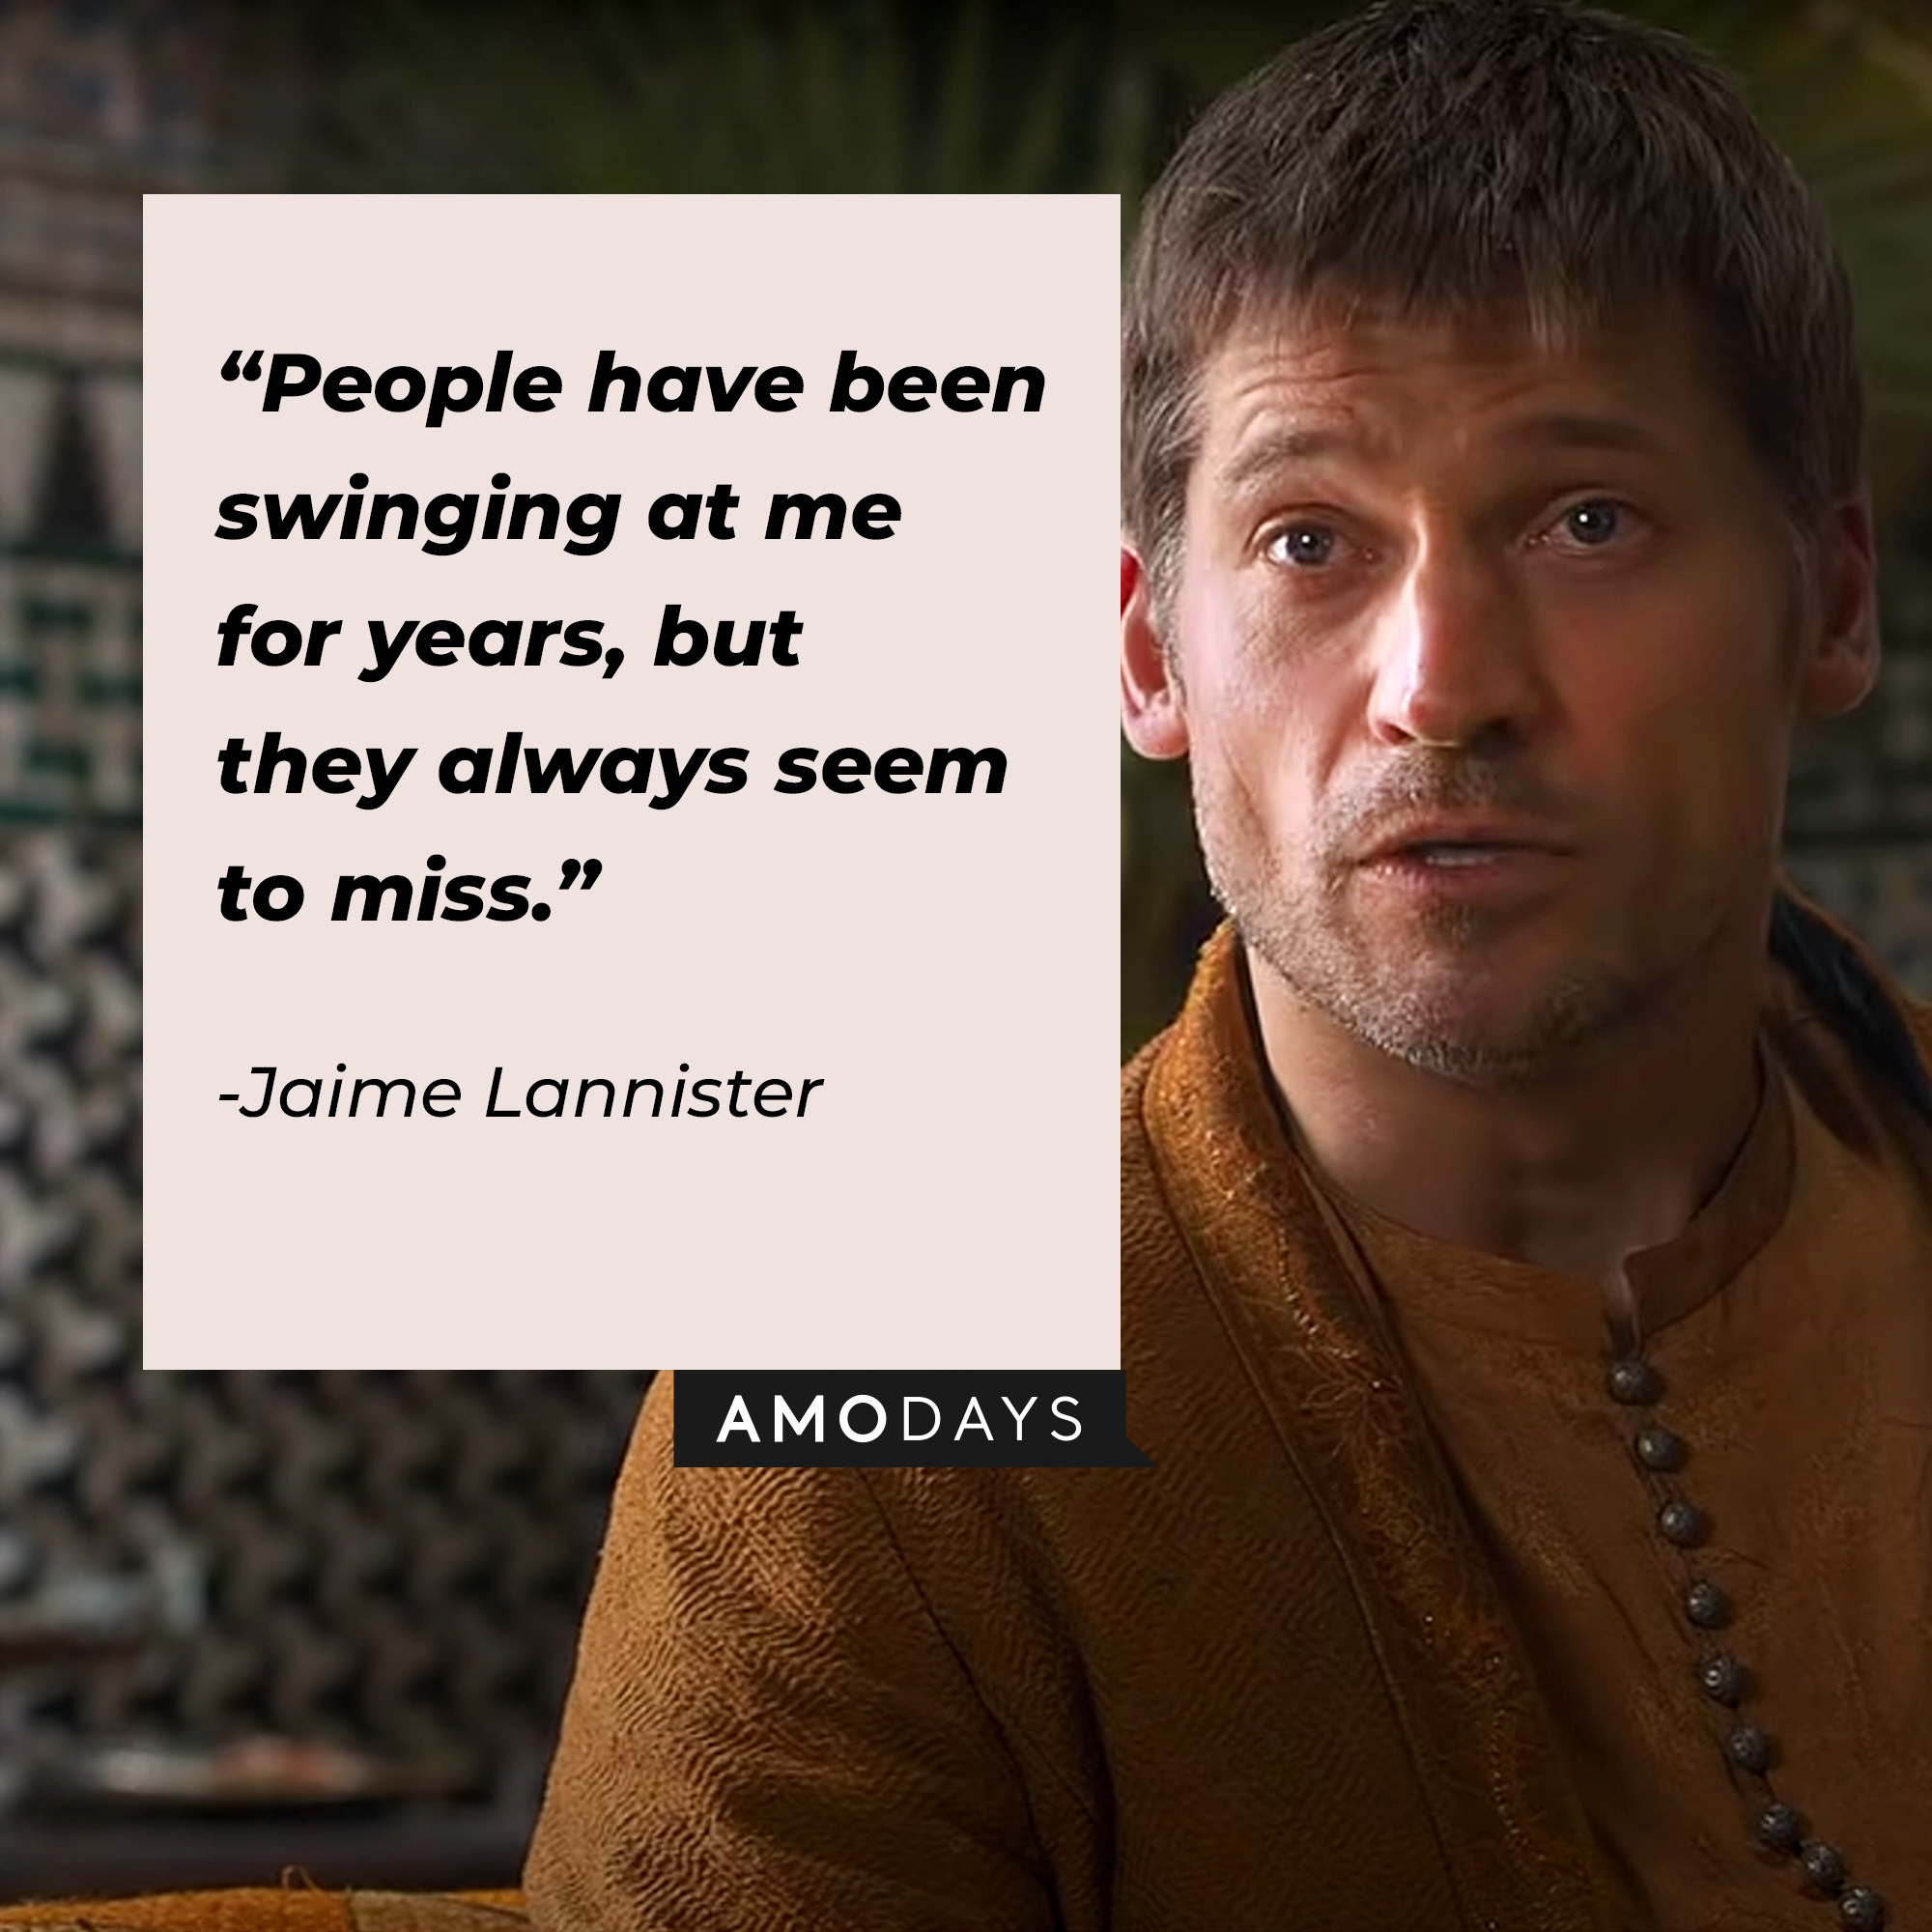 An image of Jaime Lannister, played by Nikolaj Coster-Waldau, with his quote: "People have been swinging at me for years, but they always seem to miss.” | Source: facebook.com/Game of Thrones